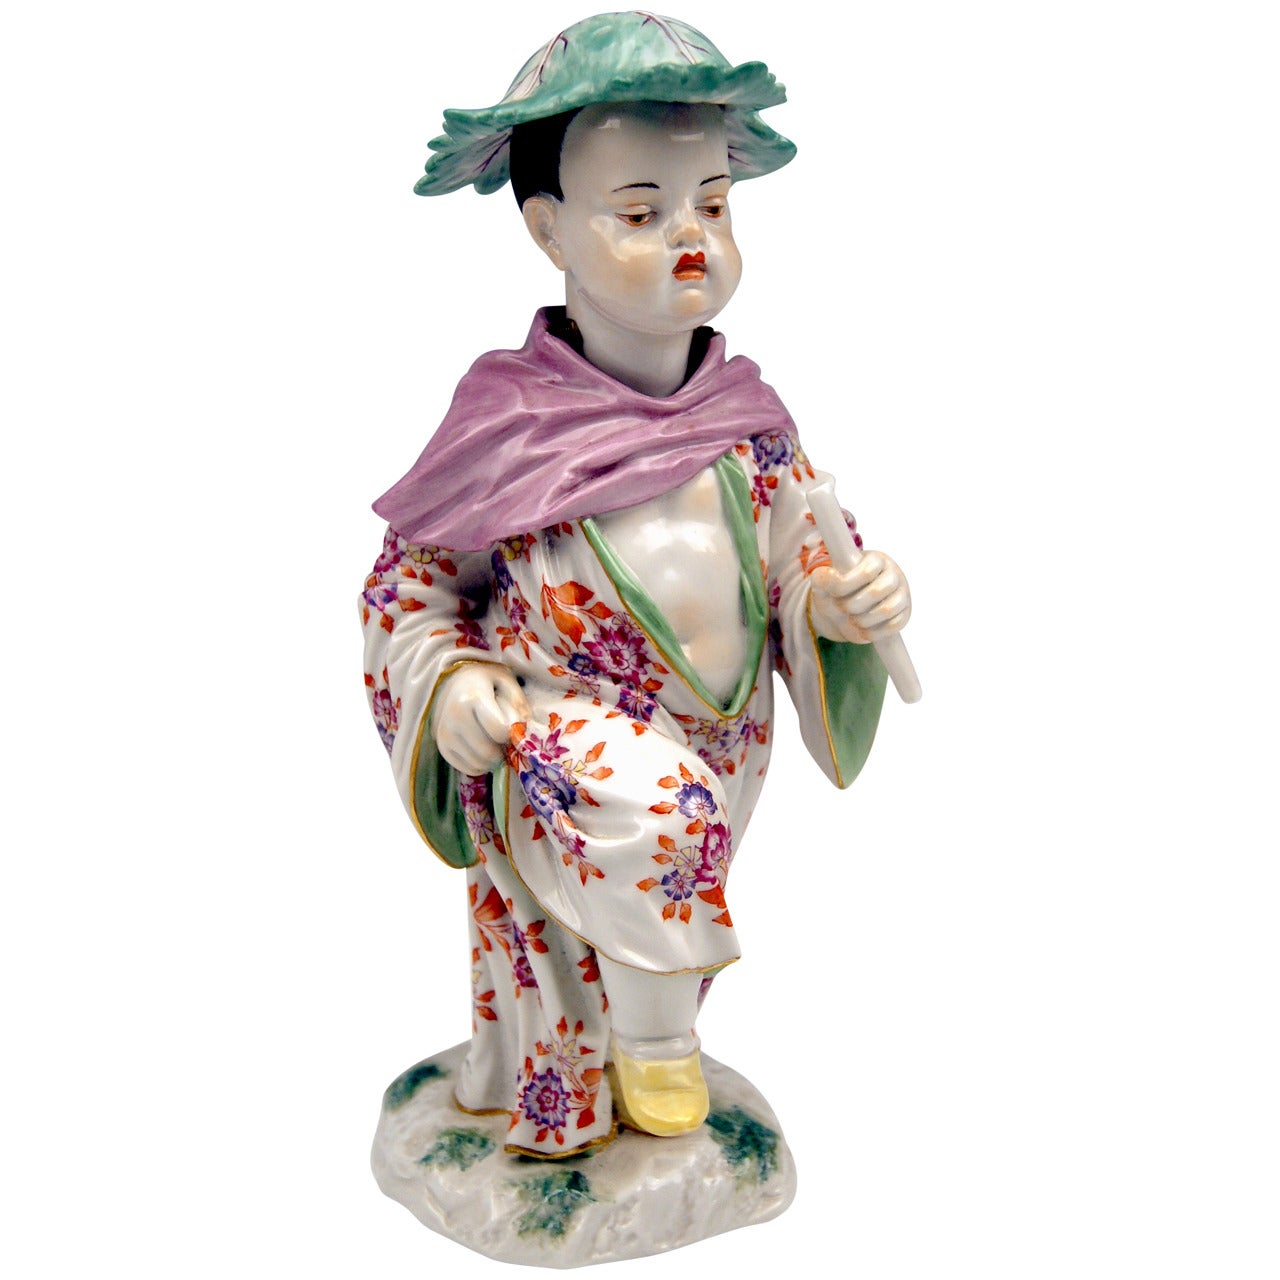 Meissen Chinese Boy with Hat made of Cabbages' Leaves Kändler made 20th century